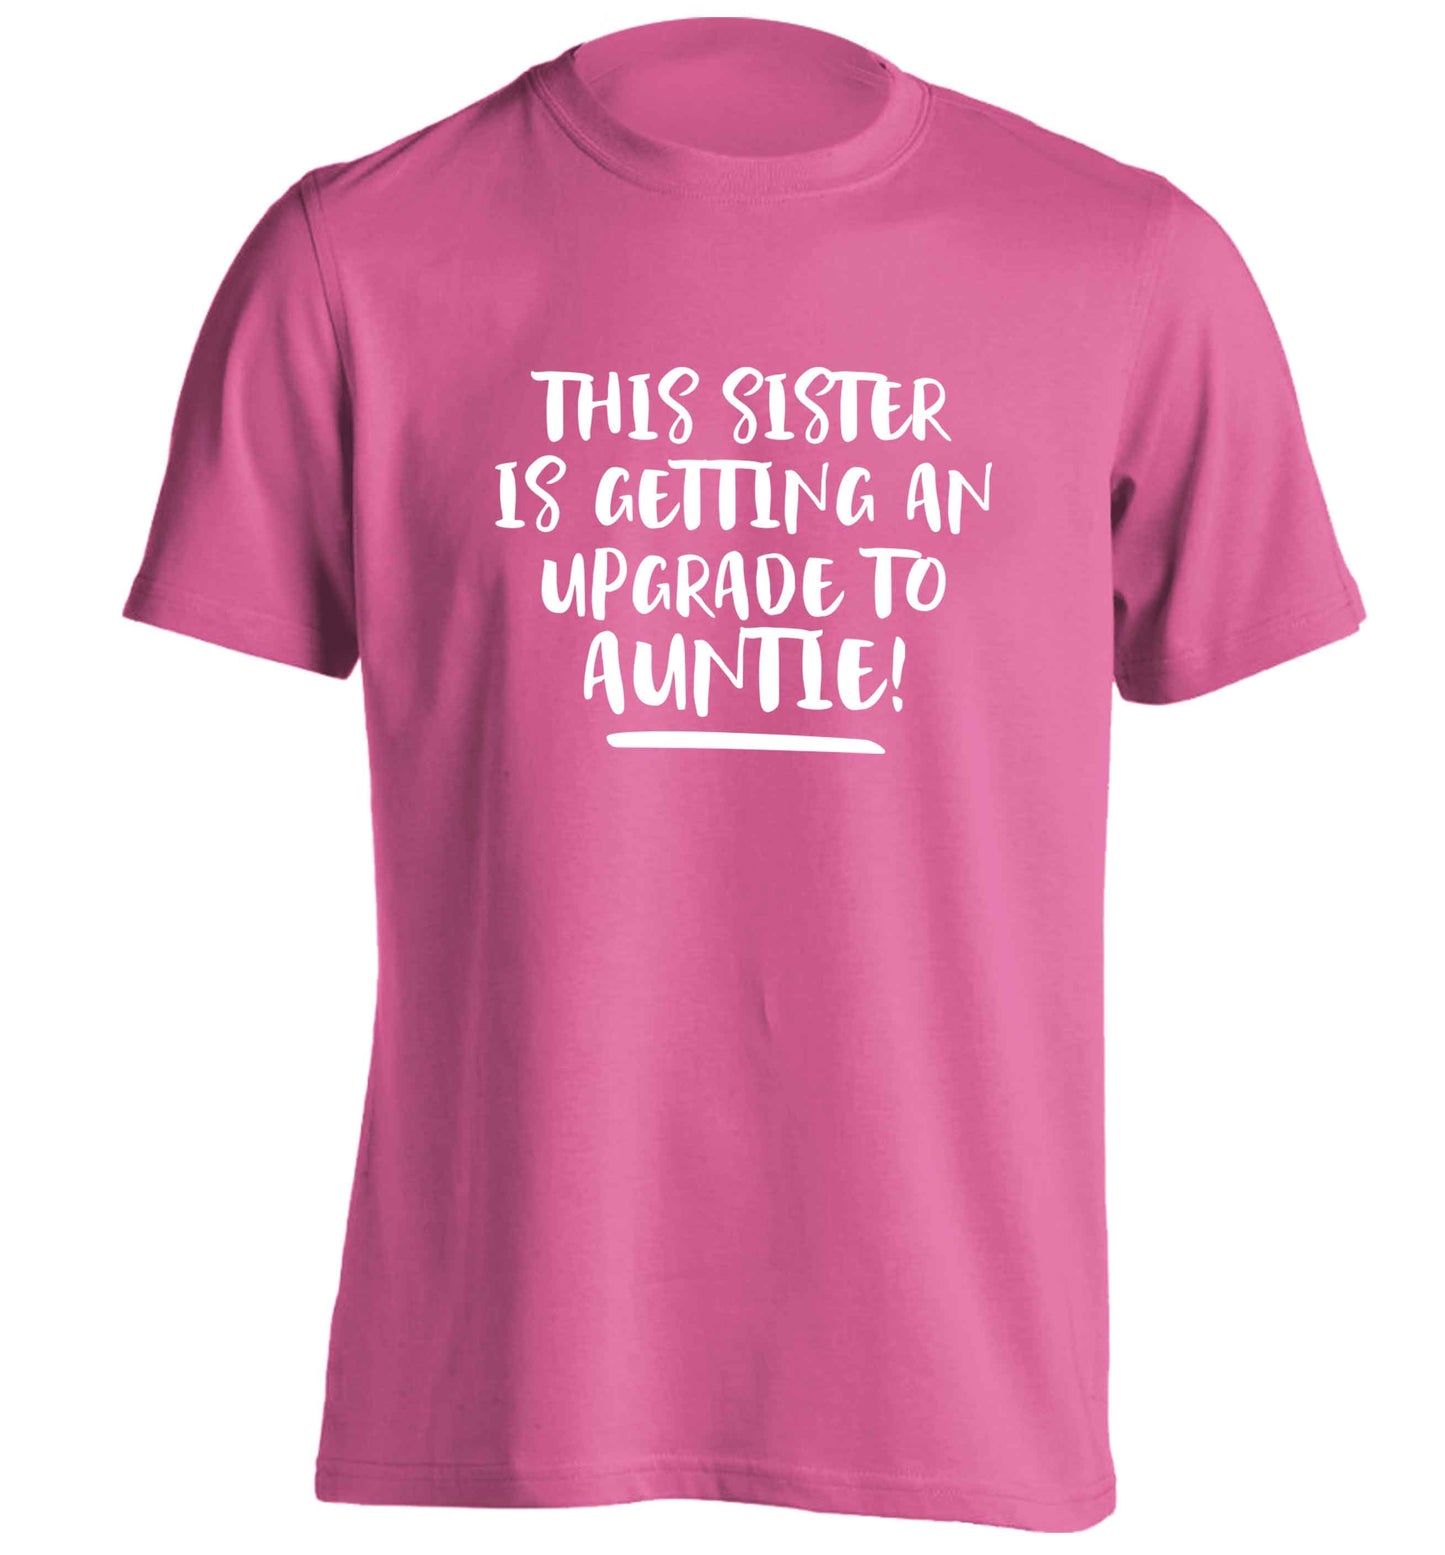 This sister is getting an upgrade to auntie! adults unisex pink Tshirt 2XL